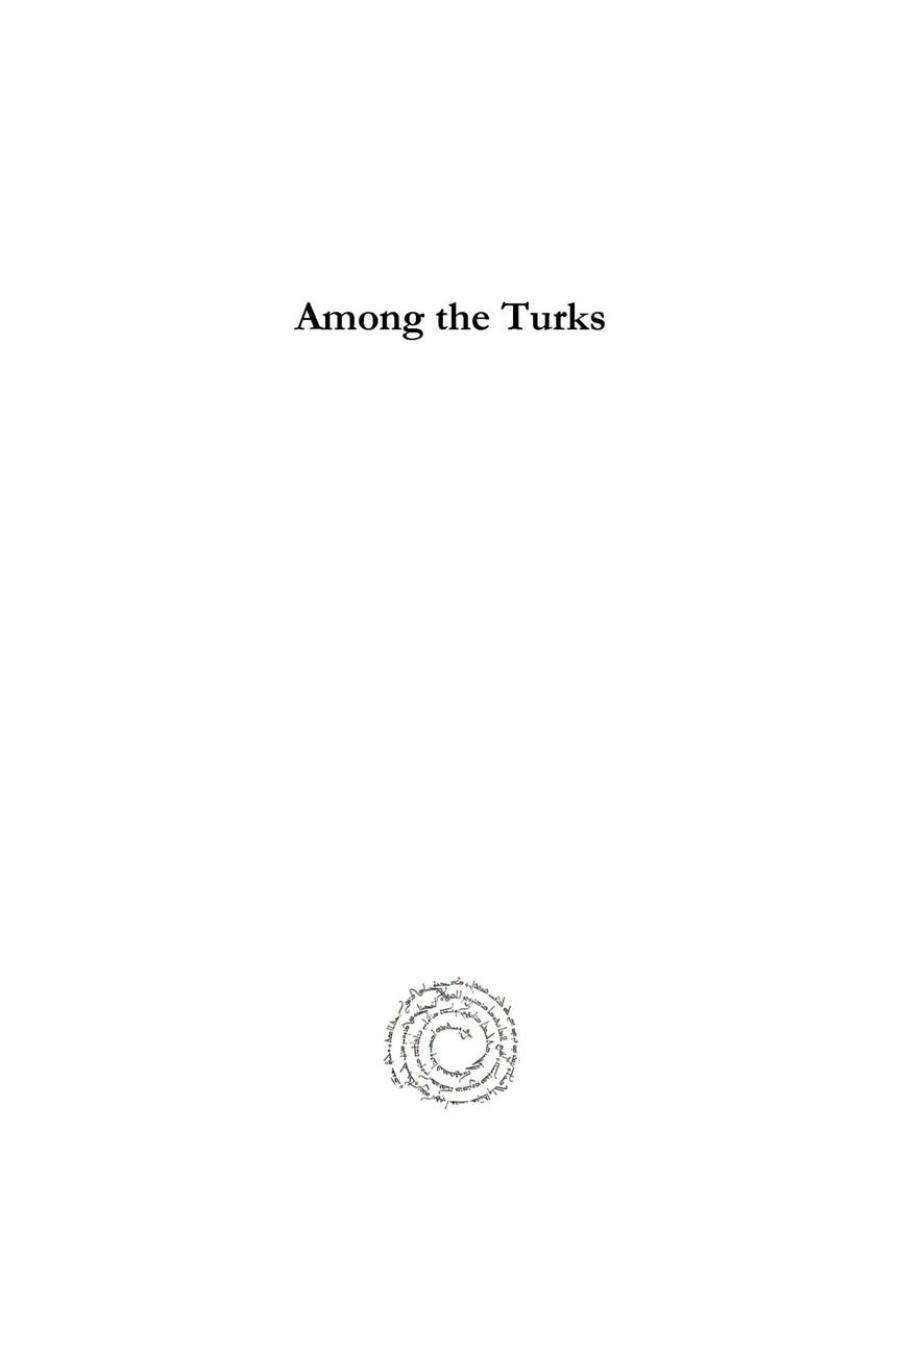 Among the Turks (Gorgias Historic Travels in the Cradle of Civilization) by Cyrus Hamlin